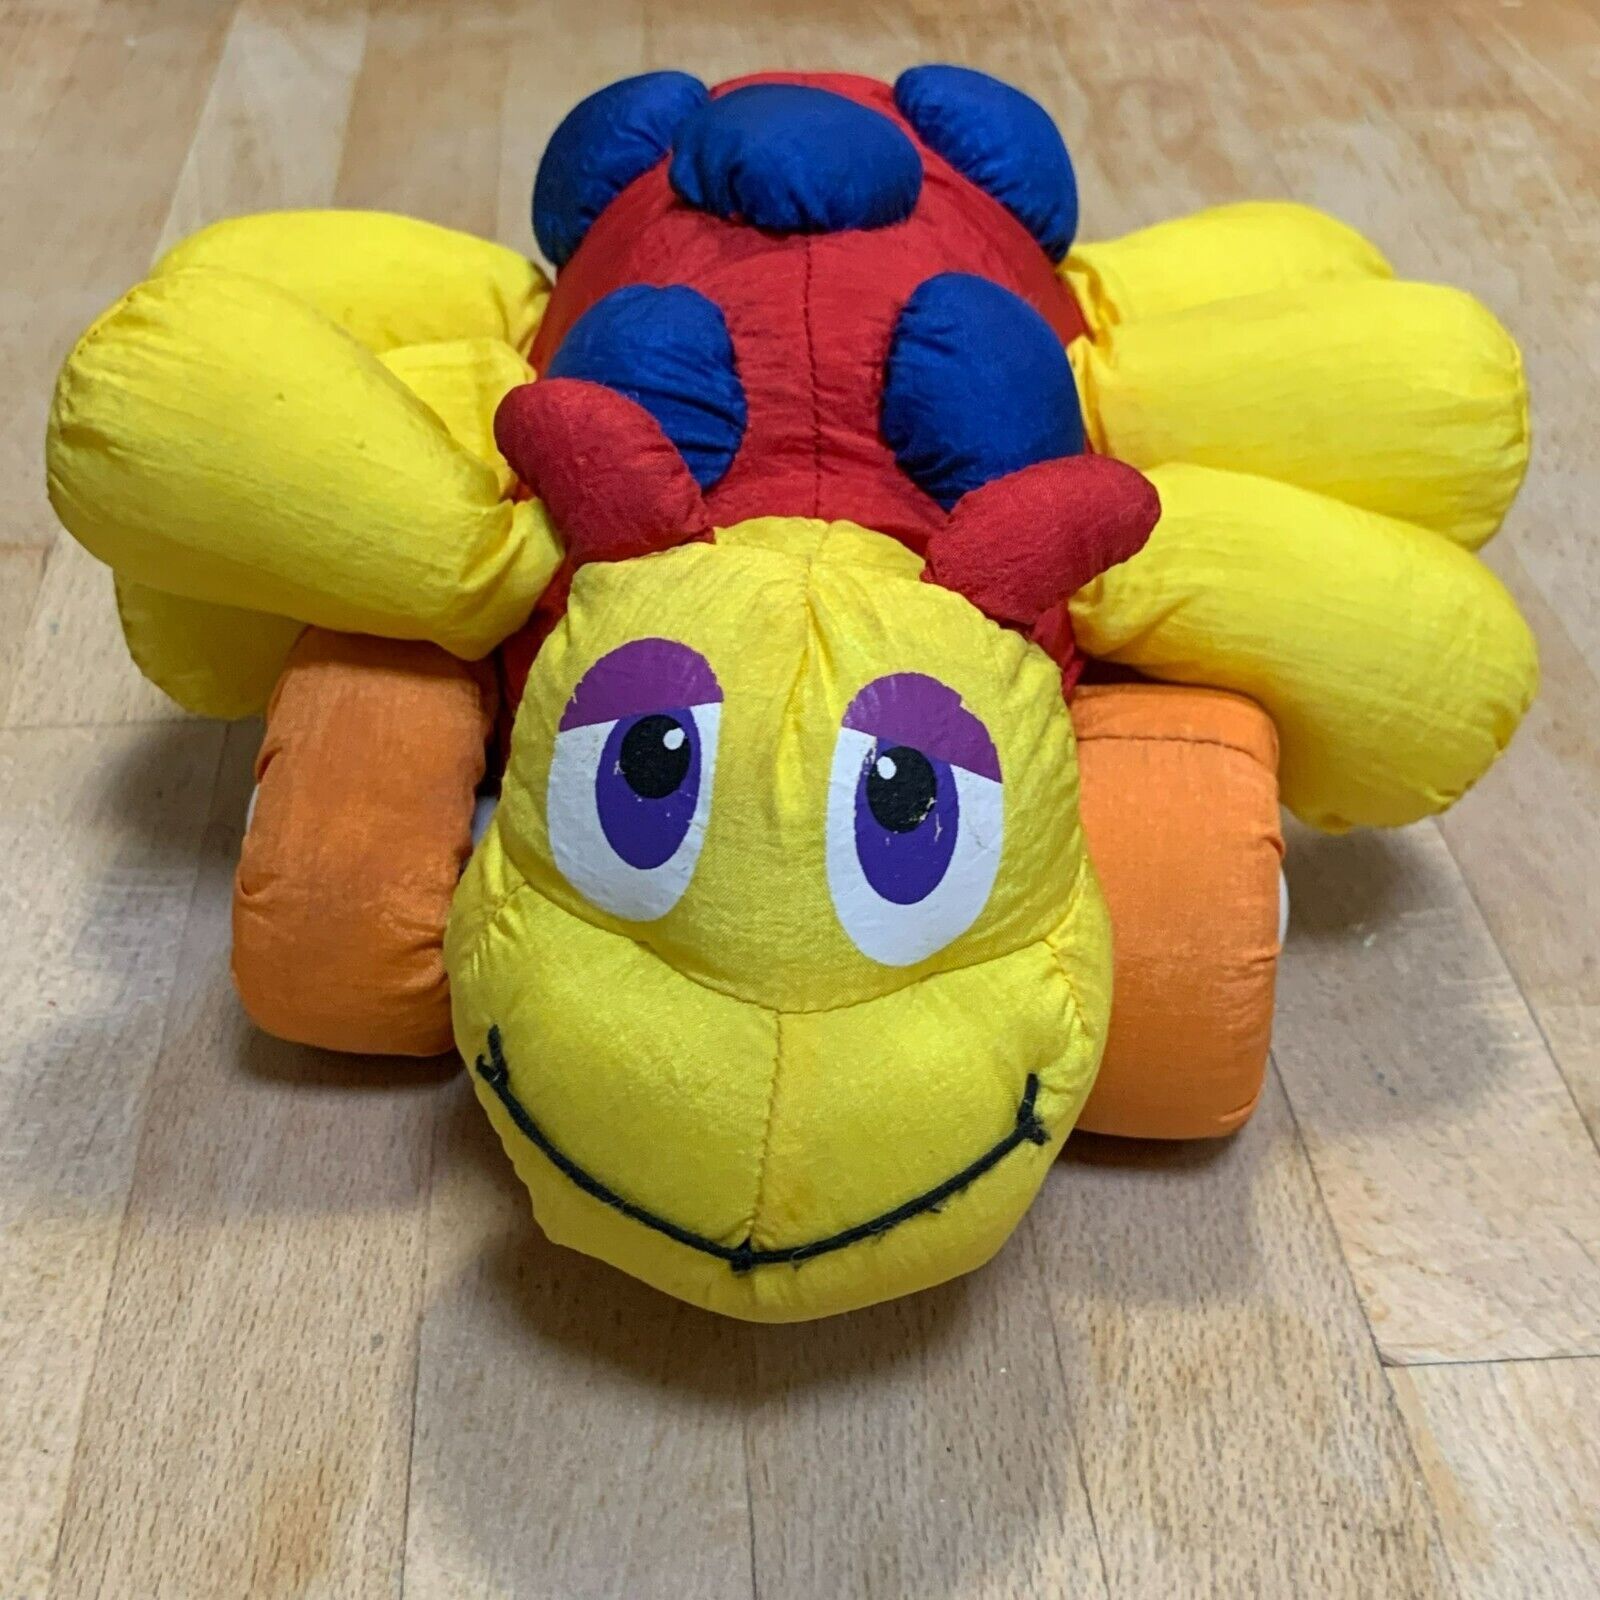 Kinderkids Vintage Rolling Bug Toy With Lights From the 1990s - £7.75 GBP